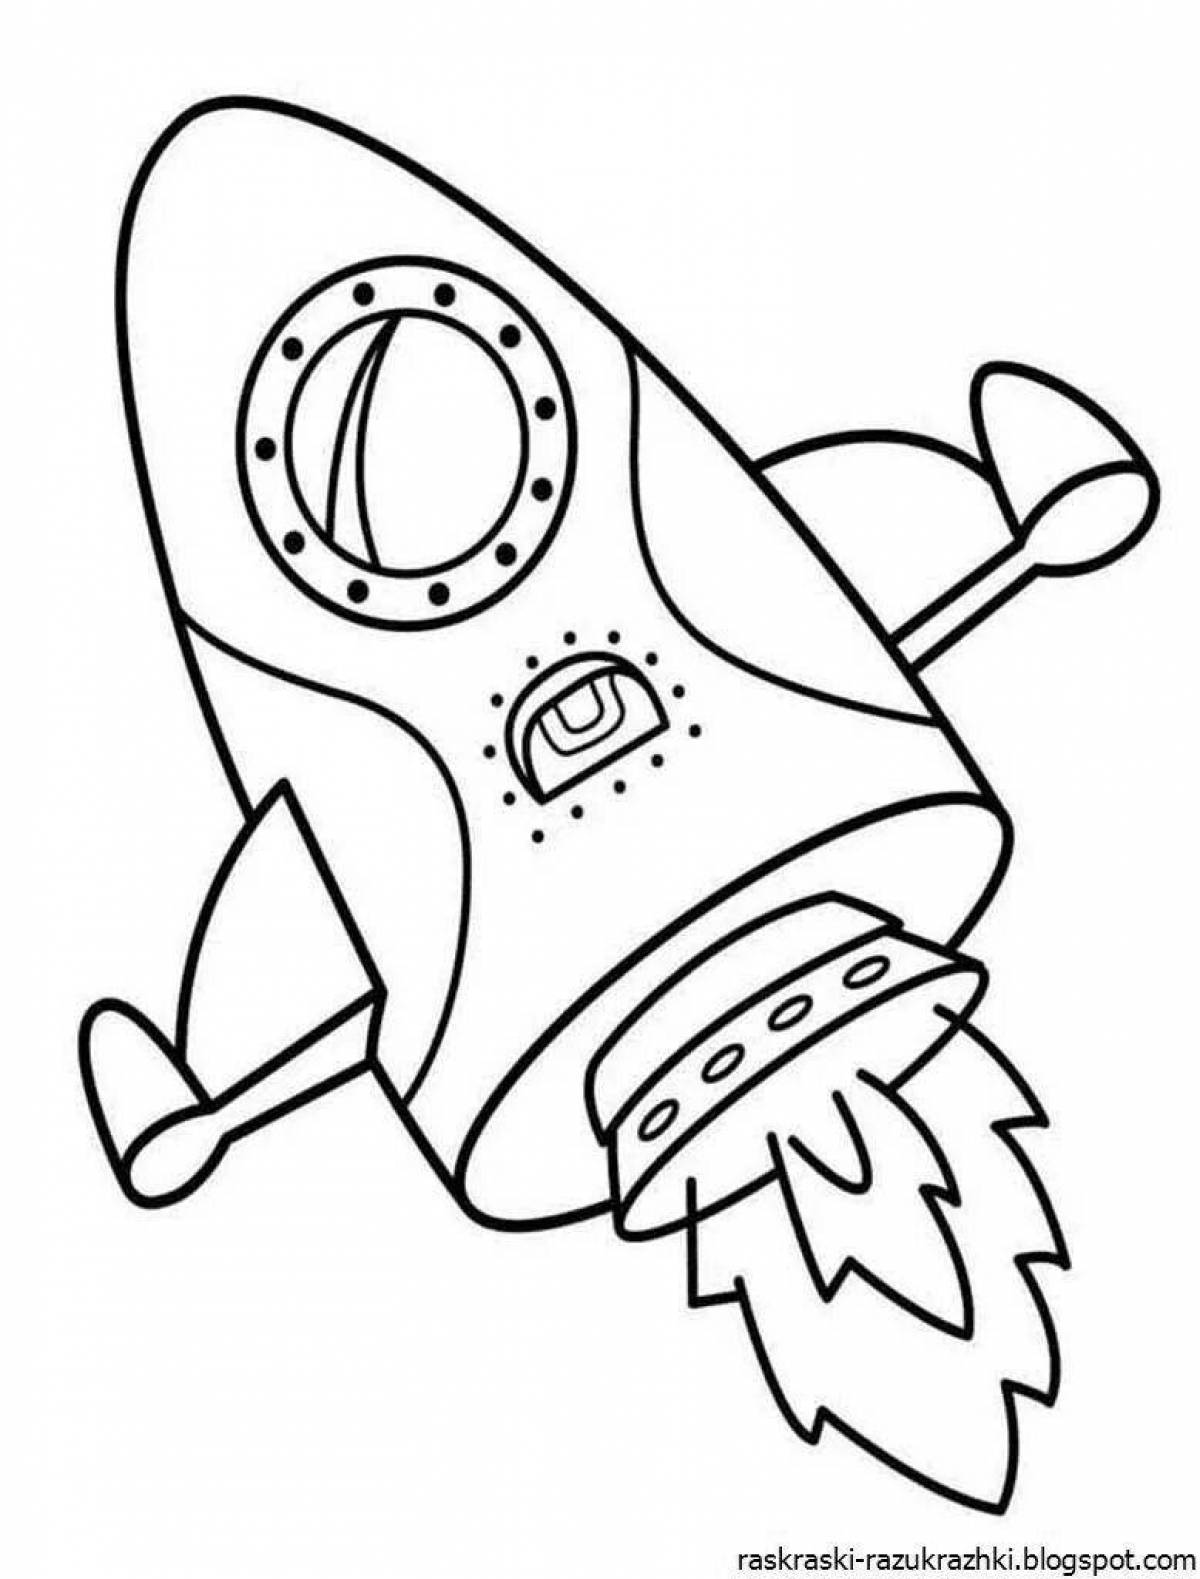 Colorful rocket coloring book for 3-4 year olds